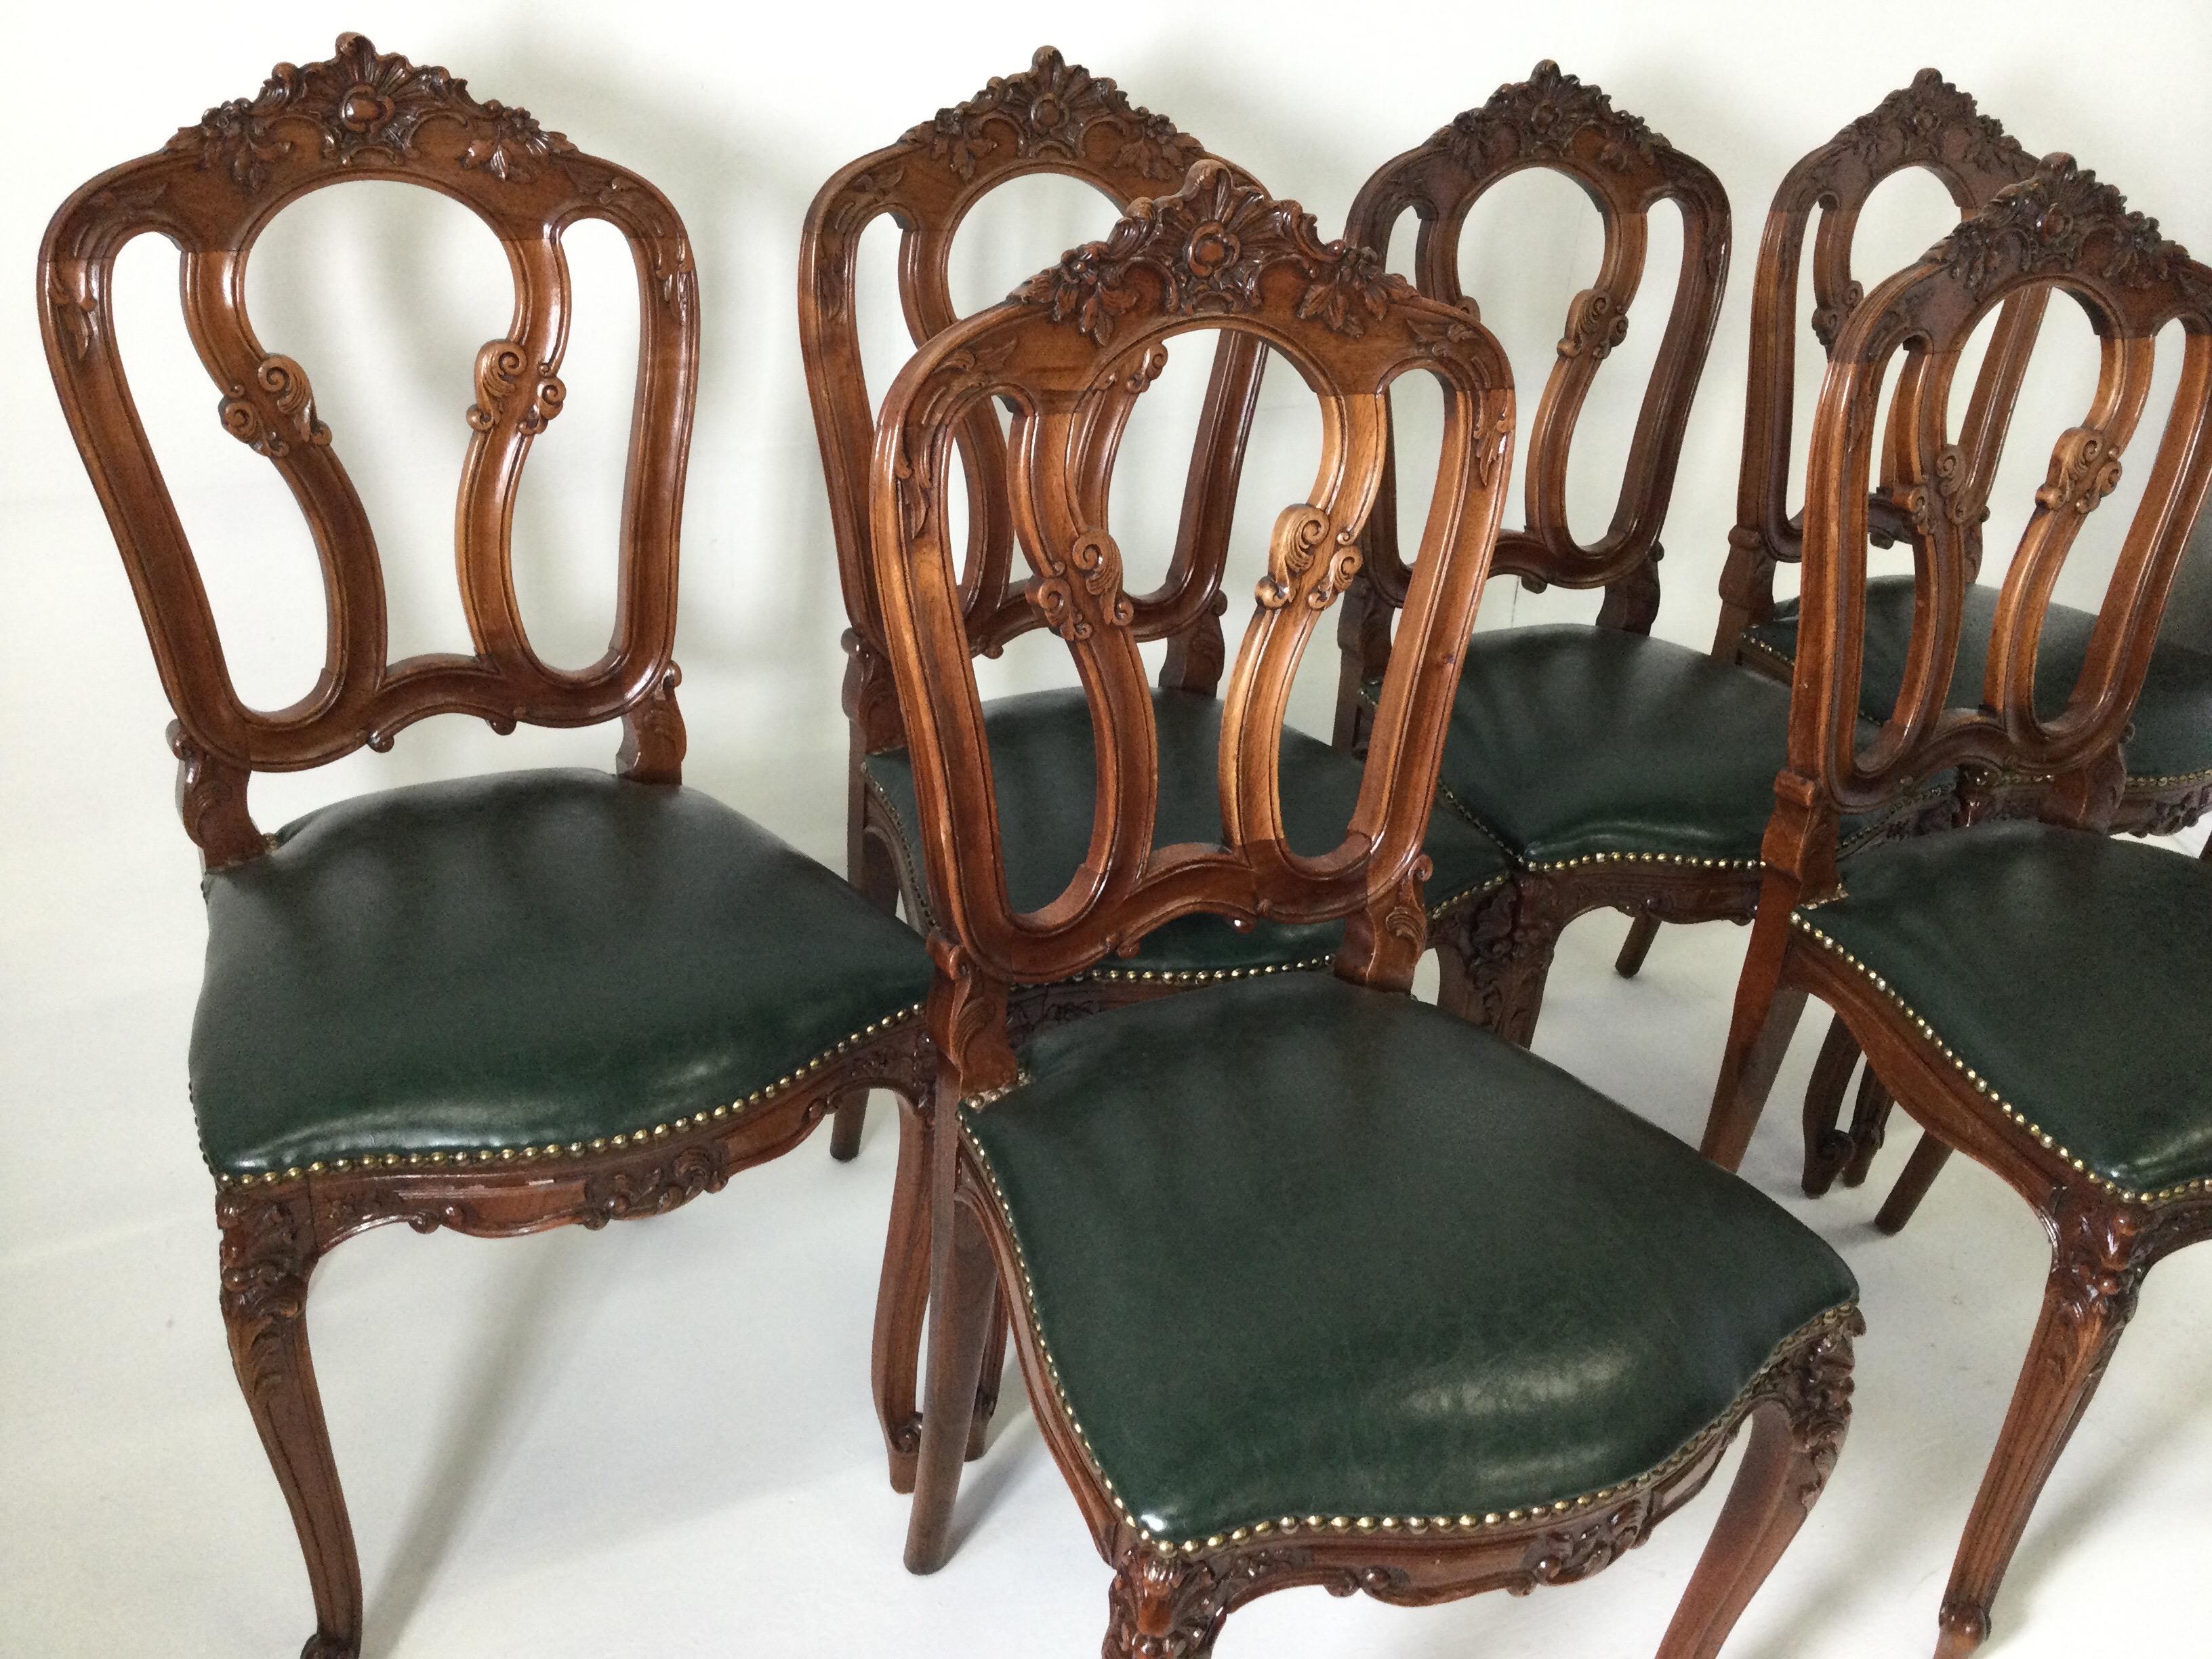 Set of six carved French style walnut chairs with green leather seats, circa 1900
Traditional shape and form with beautiful hand carving. The rich dark green leather seats are attached with antique brass nailhead trim. Very clean